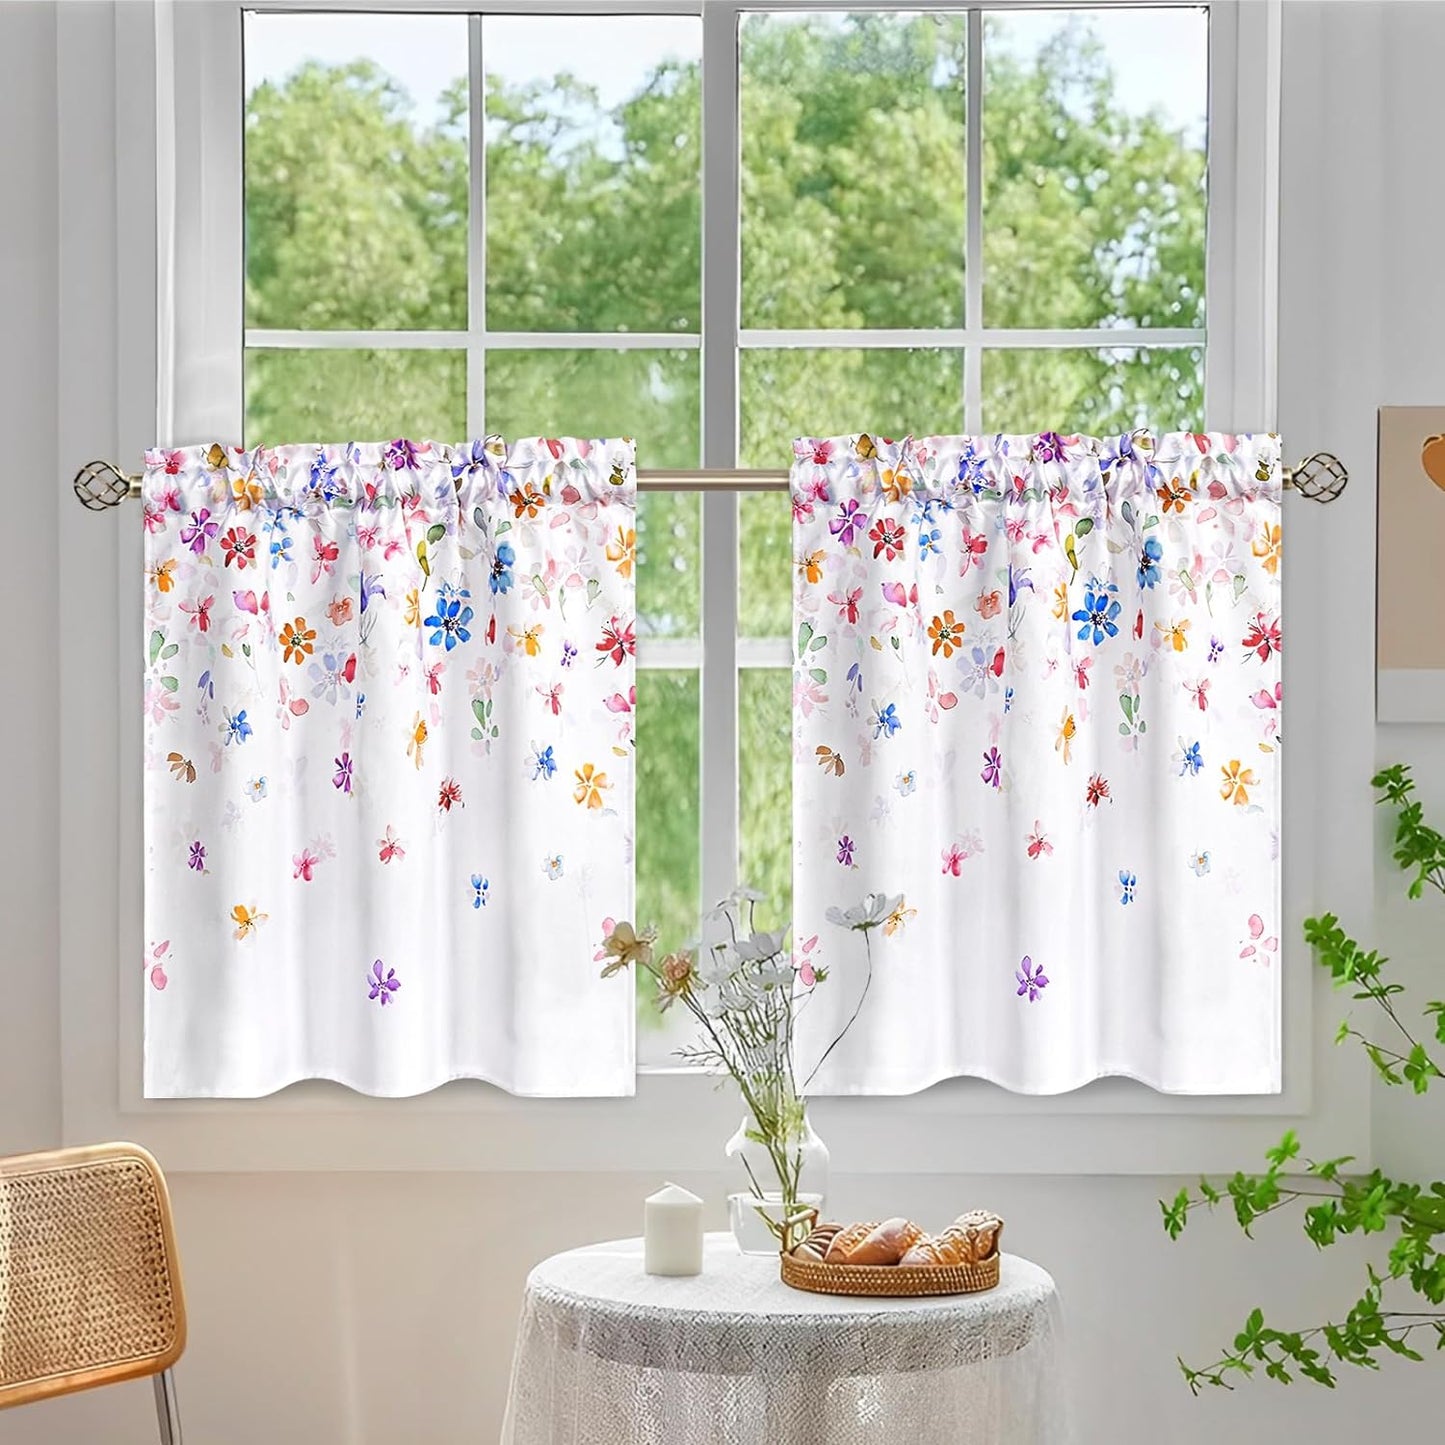 FRAMICS Floral Window Curtains for Living Room Floral Curtains 63 Inch Length 2 Panels Colorful Flowers Curtains for Bedroom Light Filtering Rod Pocket Curtains, 52" W X 63" L  FRAMICS White 26"W X 24"L 